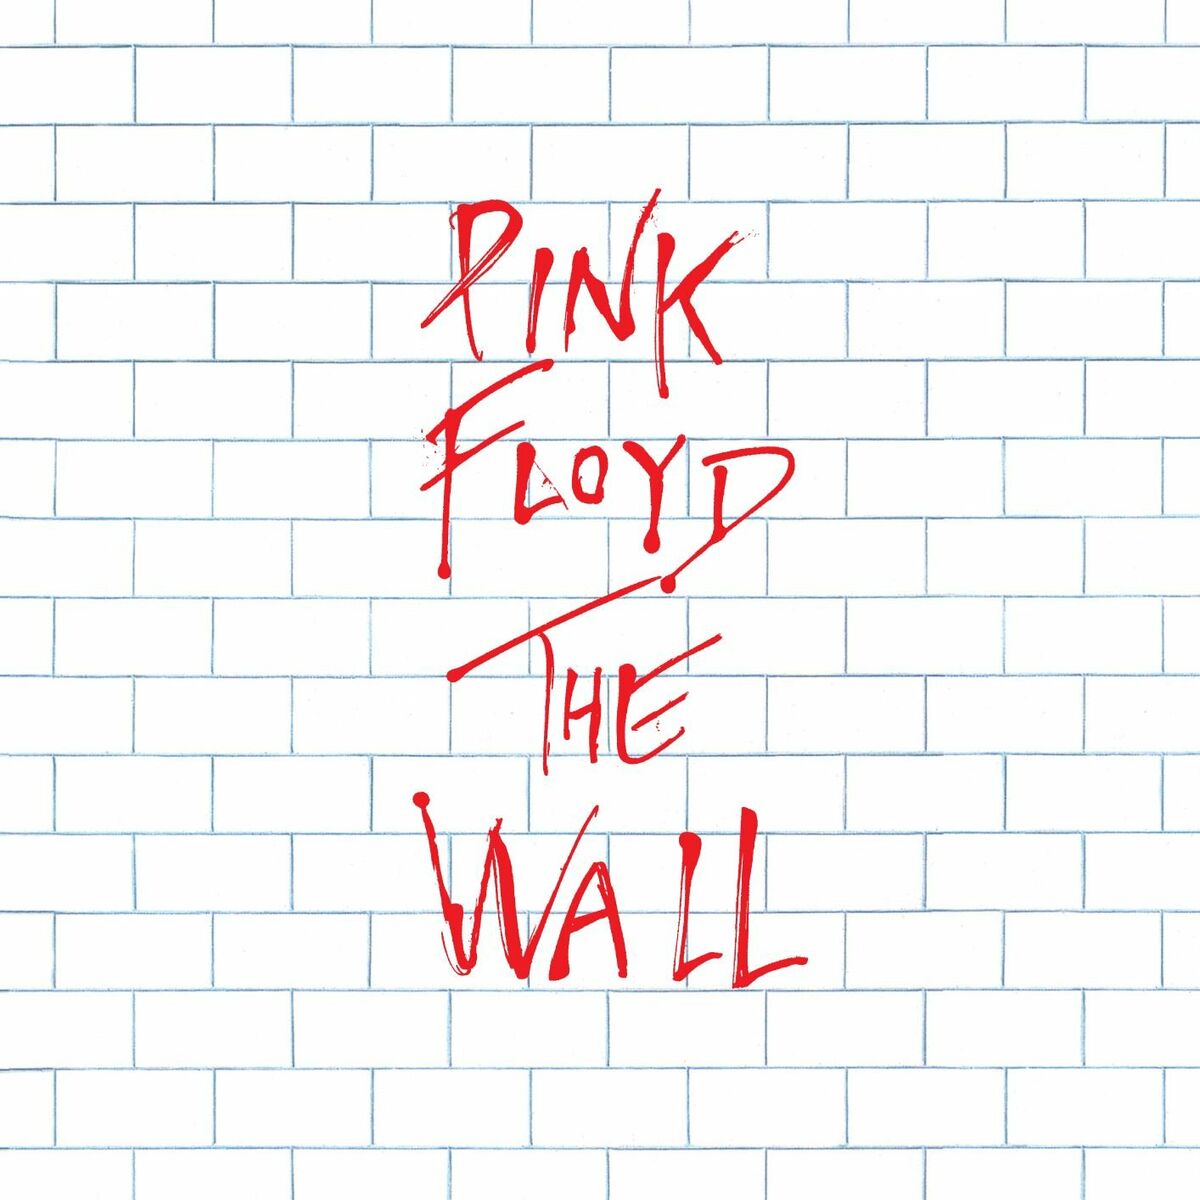 Pink Floyd - The Wall (Remastered): lyrics and songs | Deezer